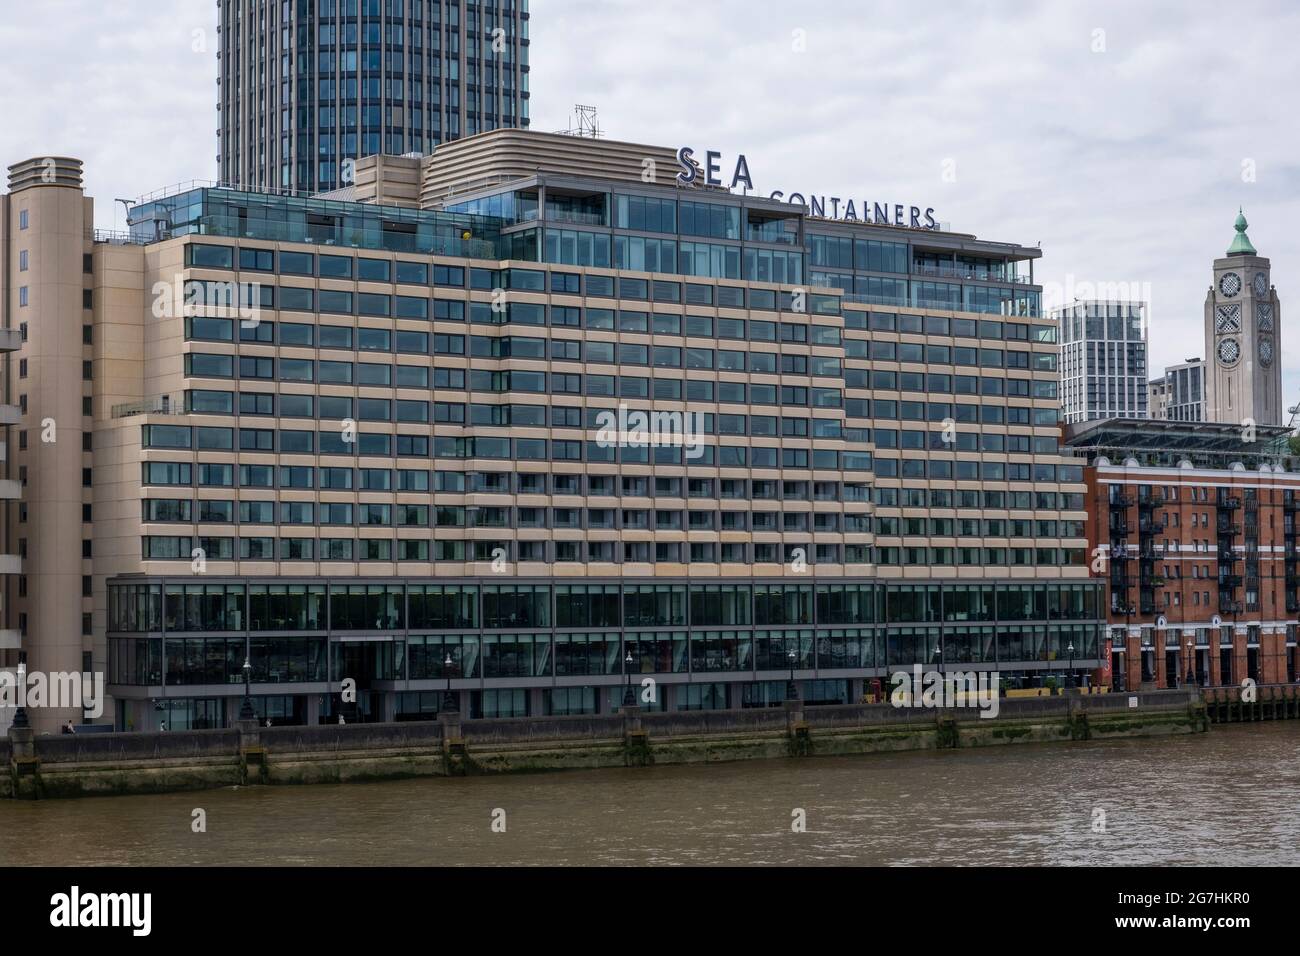 Sea Containers House, a prominent building on the south bank of the Thames in London, designed by Warren Platner, opened in 1978, hotel and offices Stock Photo